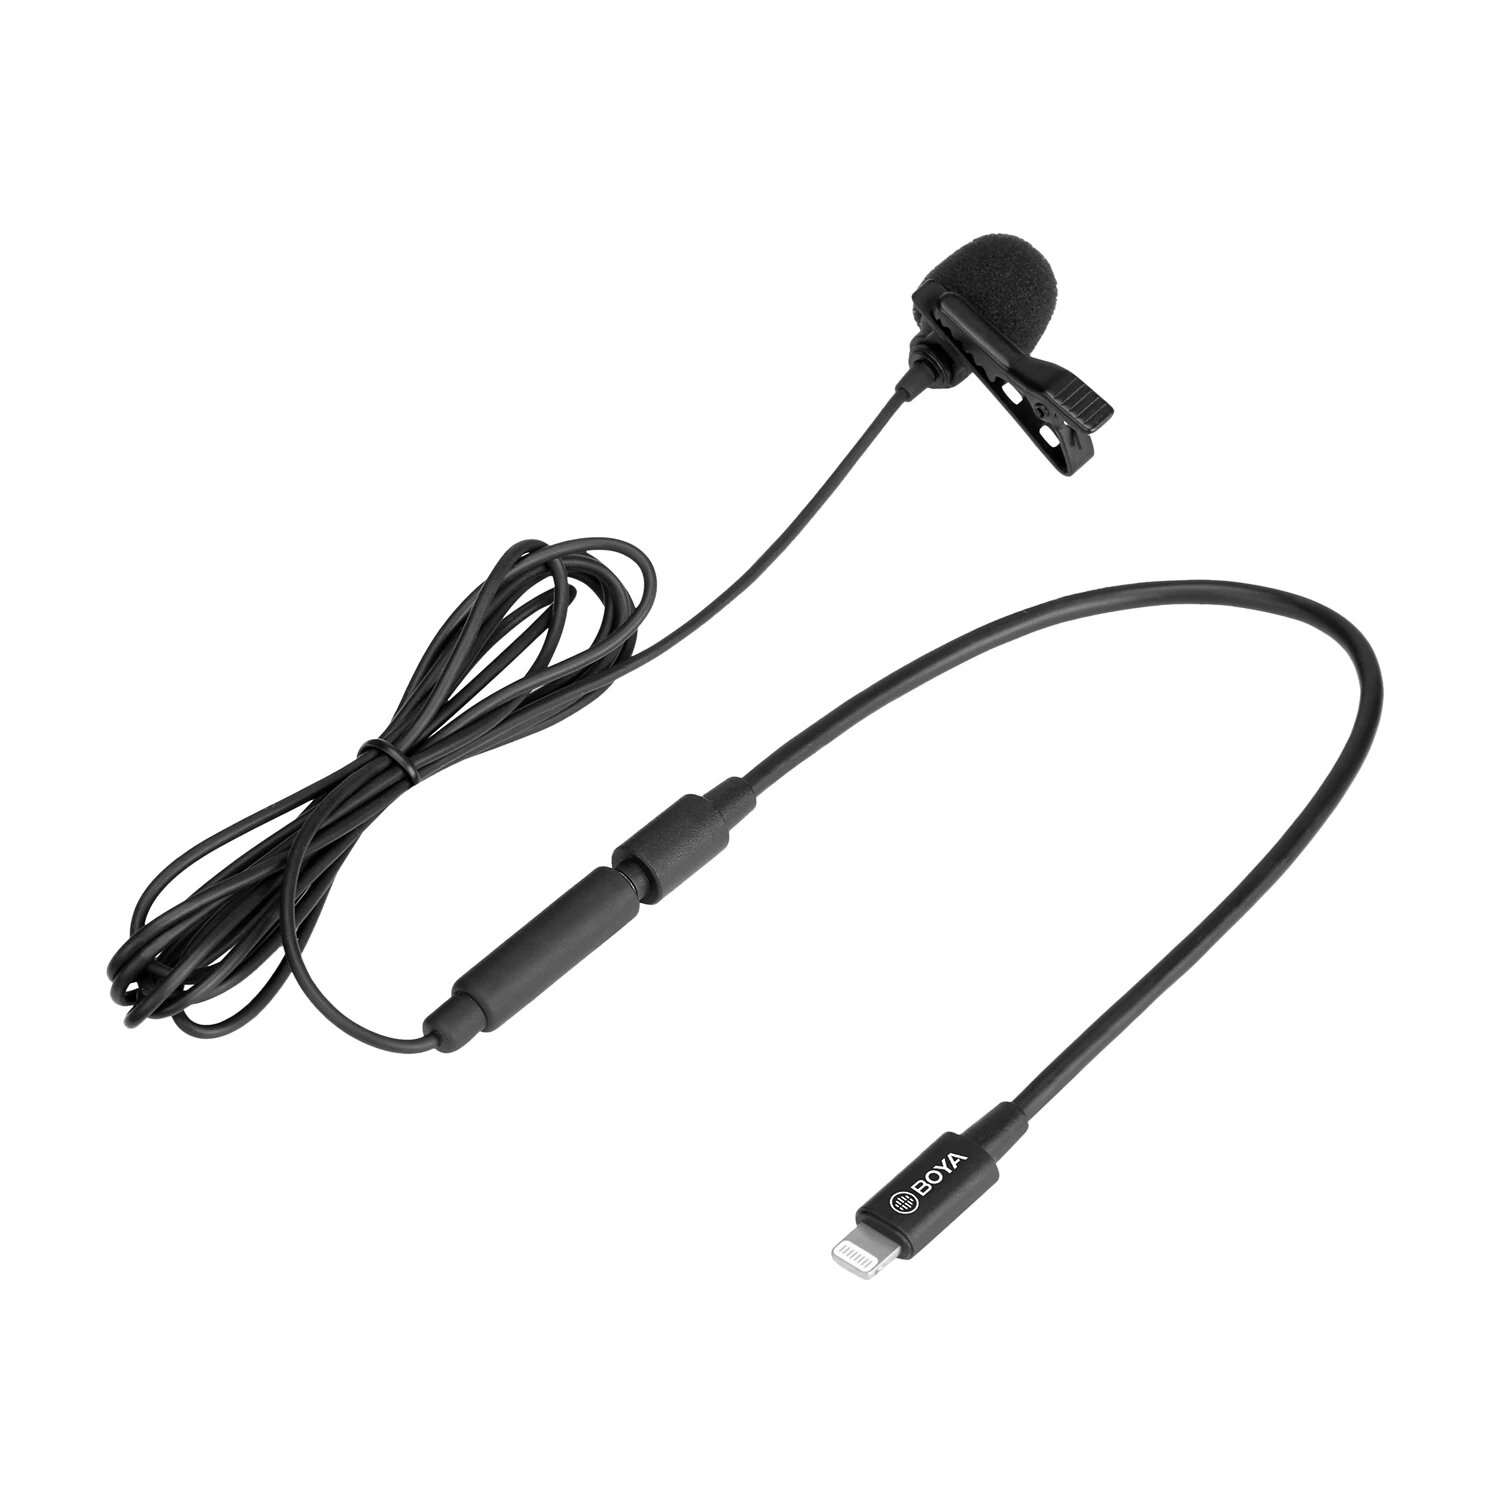 BOYA BY-M2 Cardioid Lavalier Lapel Clip-on Microphone Detachable Single Head for iOS Smartphones with 3.5mm TRS to Light